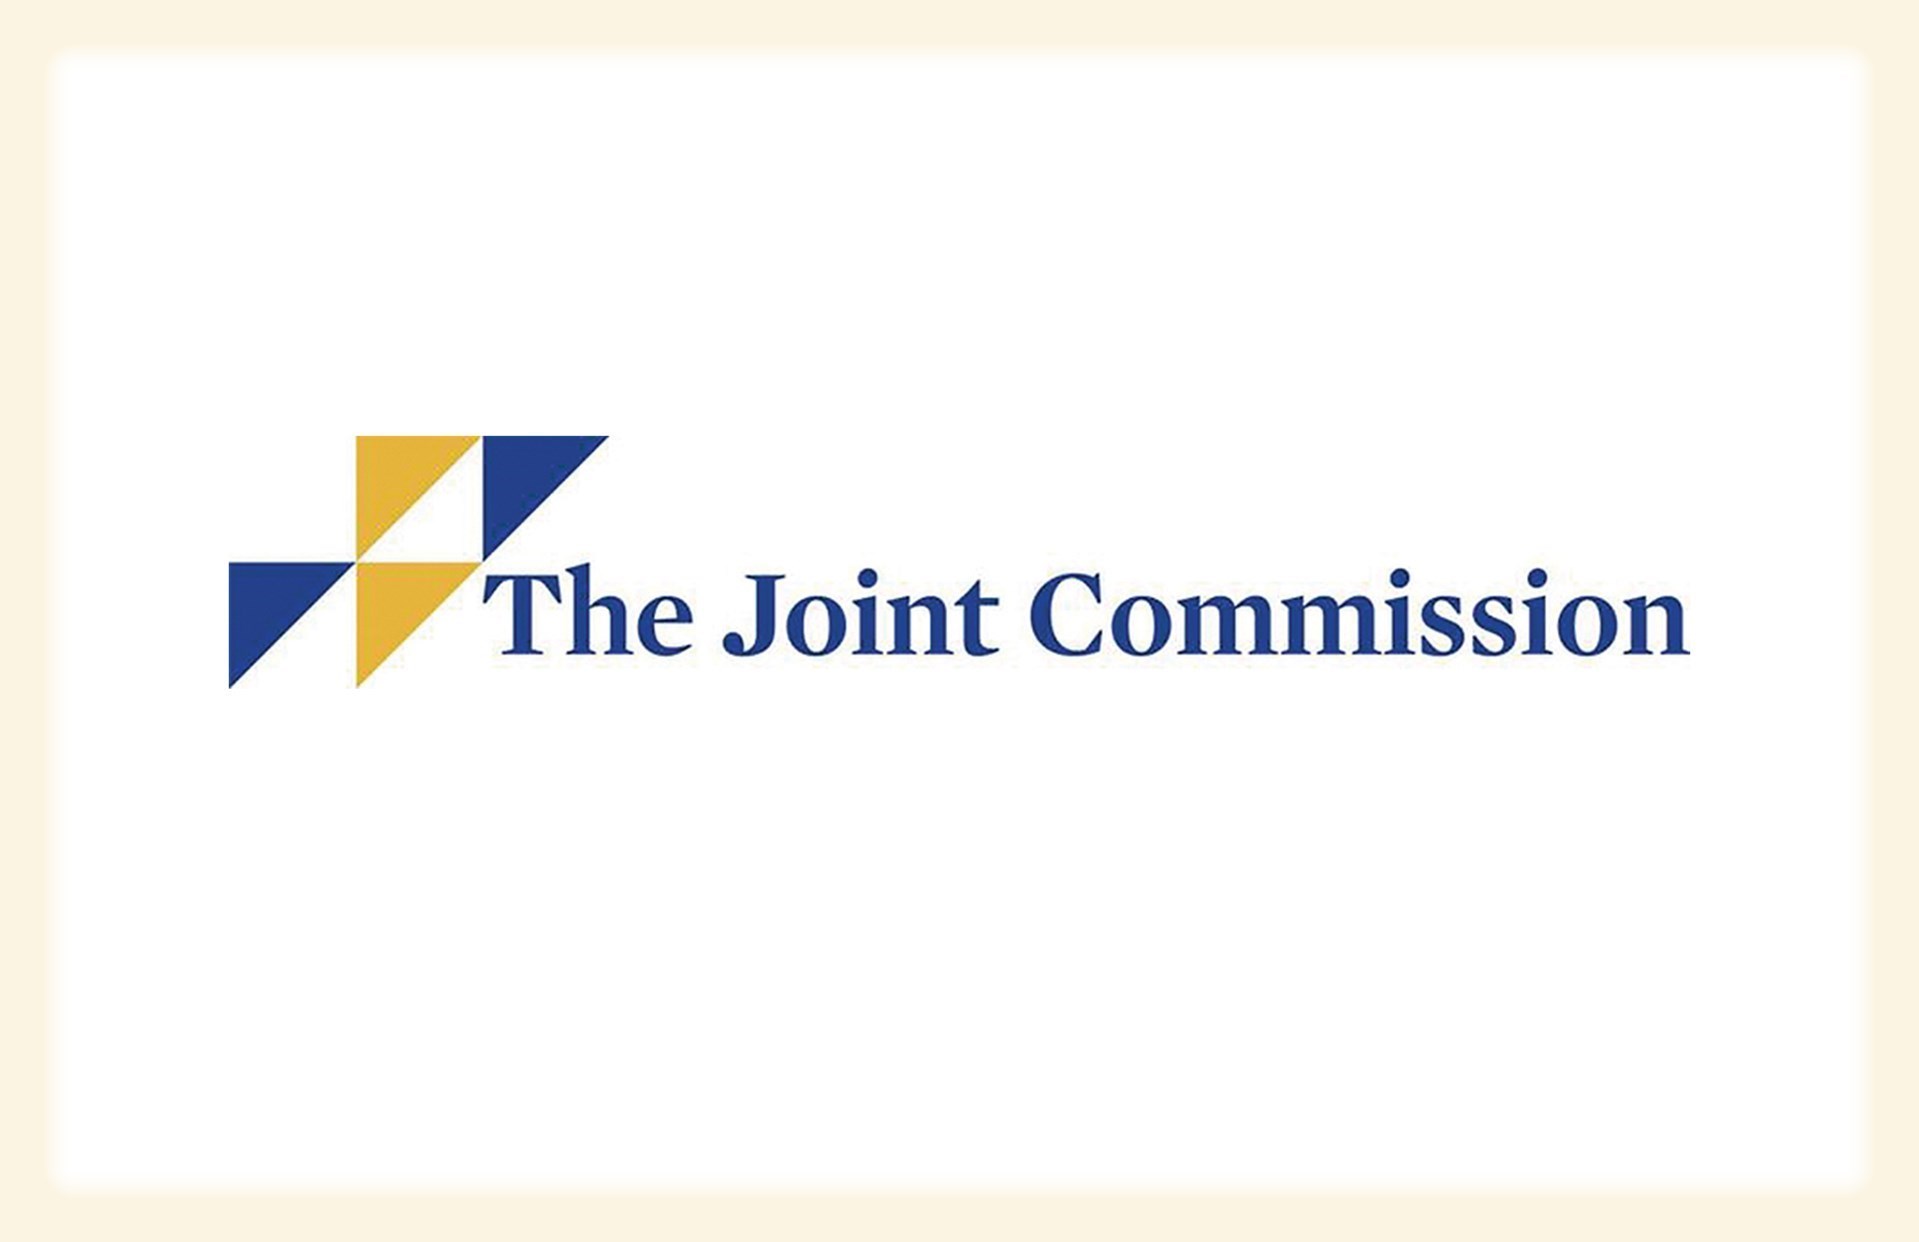 A Look at The Joint Commission